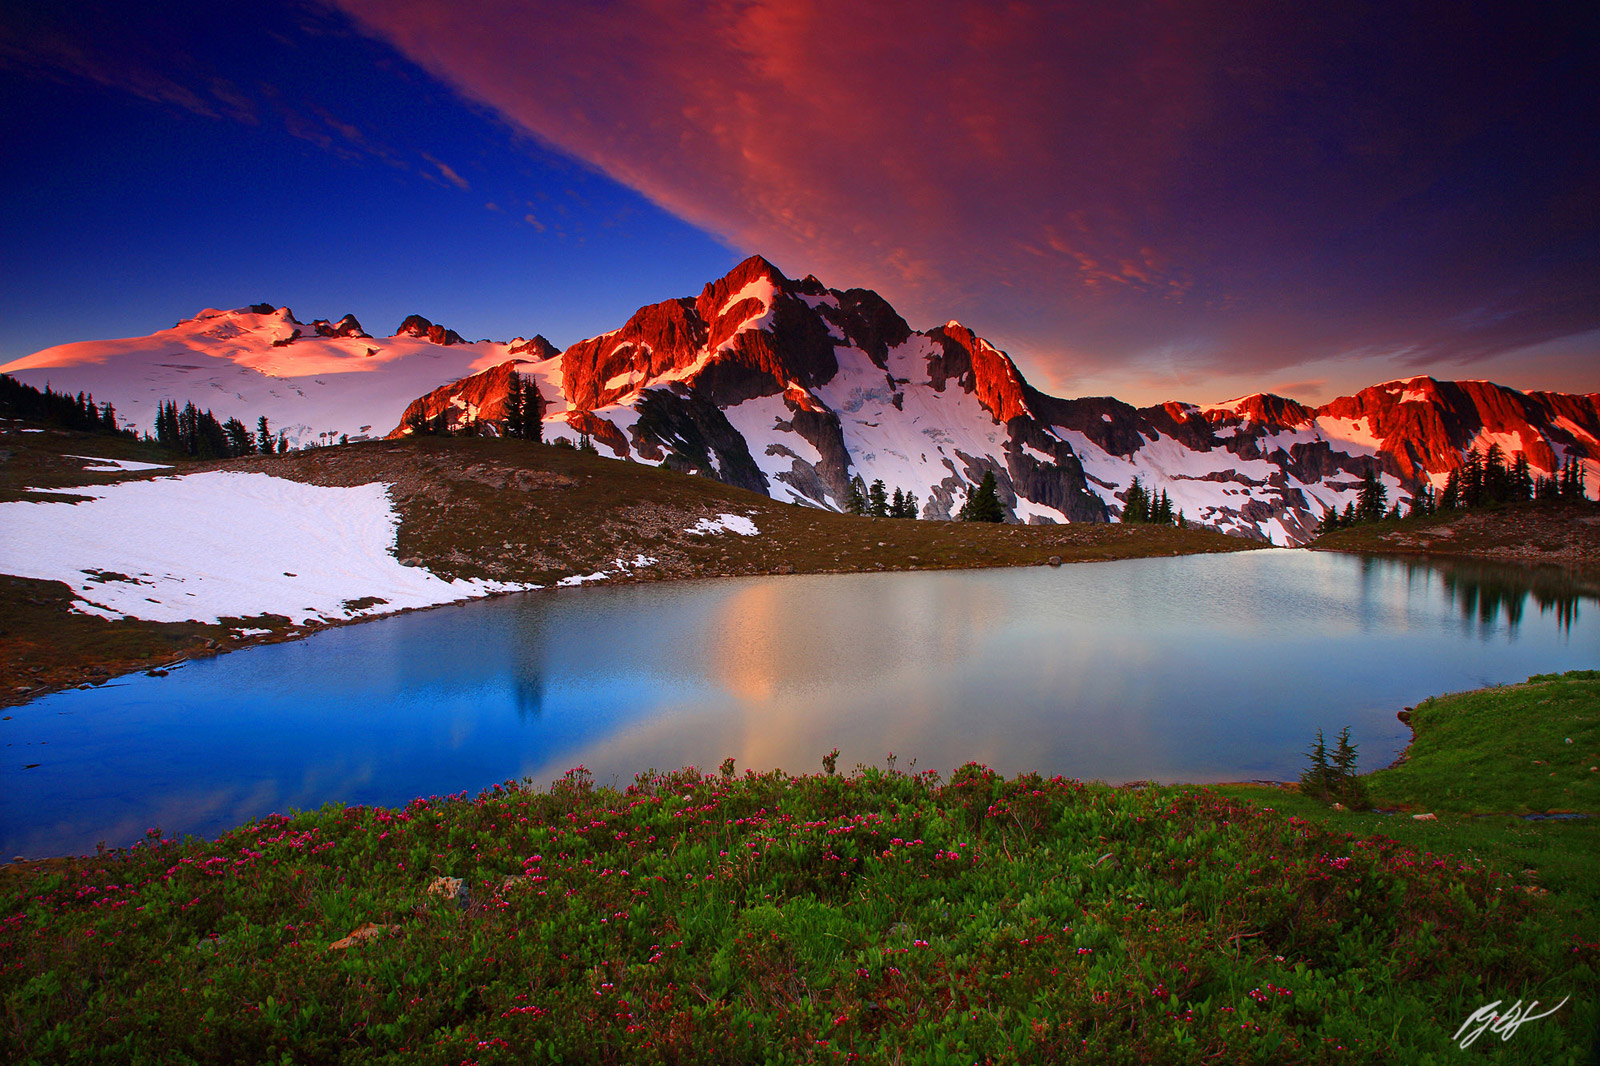 Sunrise Mt Challenger and Whatcom Peak Over Tapto Lakes in North Cascades National Park in Washington